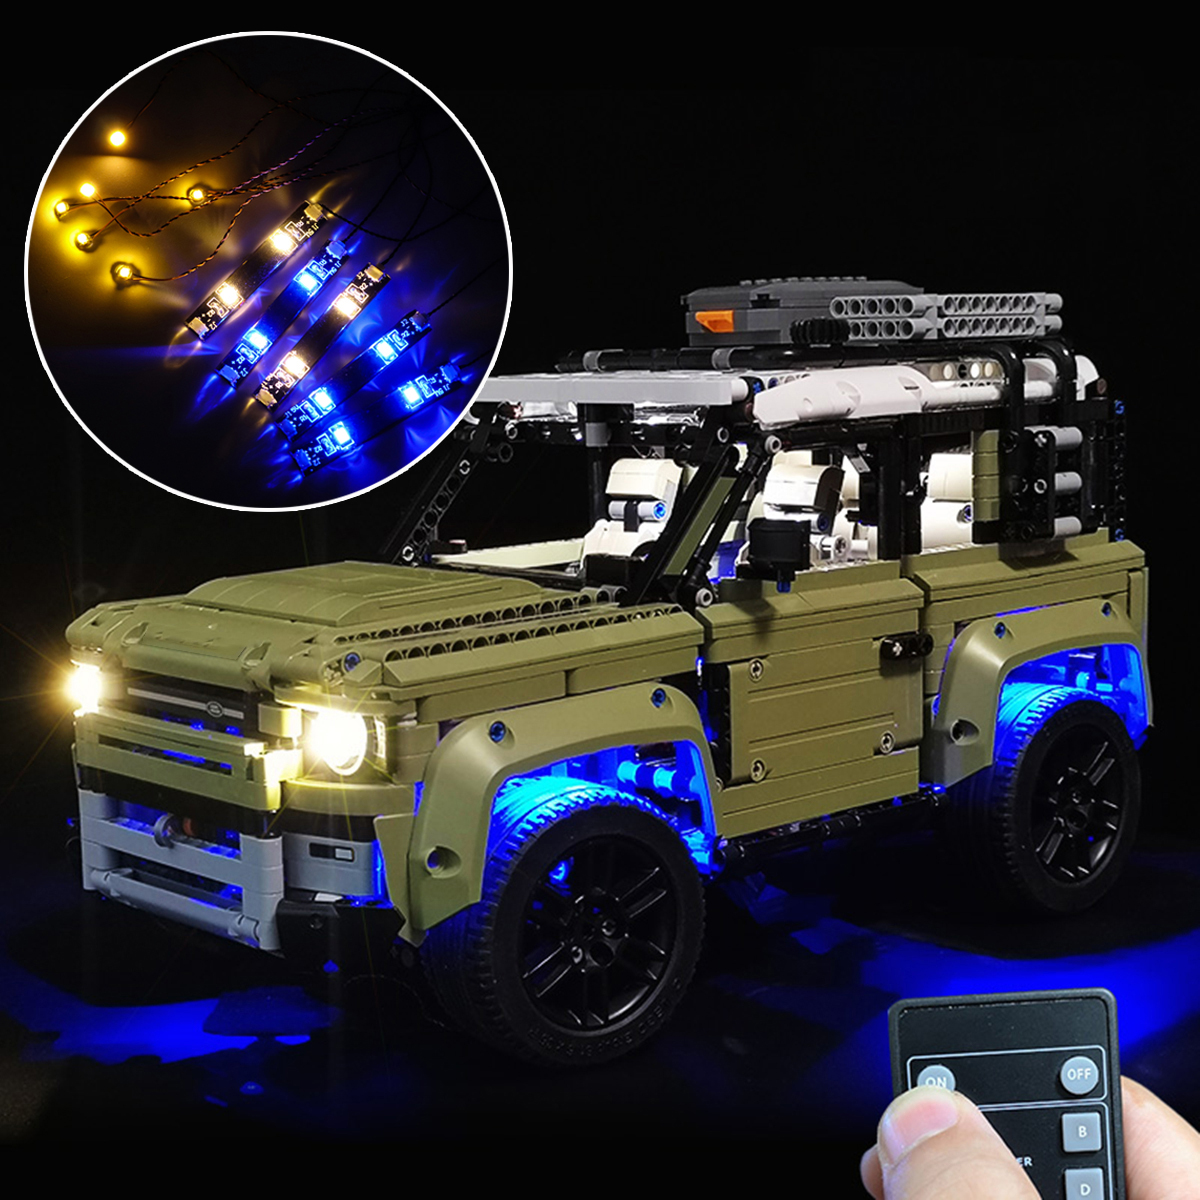 

LED Light Lighting Kit ONLY For LEGO 42110 Land Rover Defender Car Bricks Toys with Remote Control